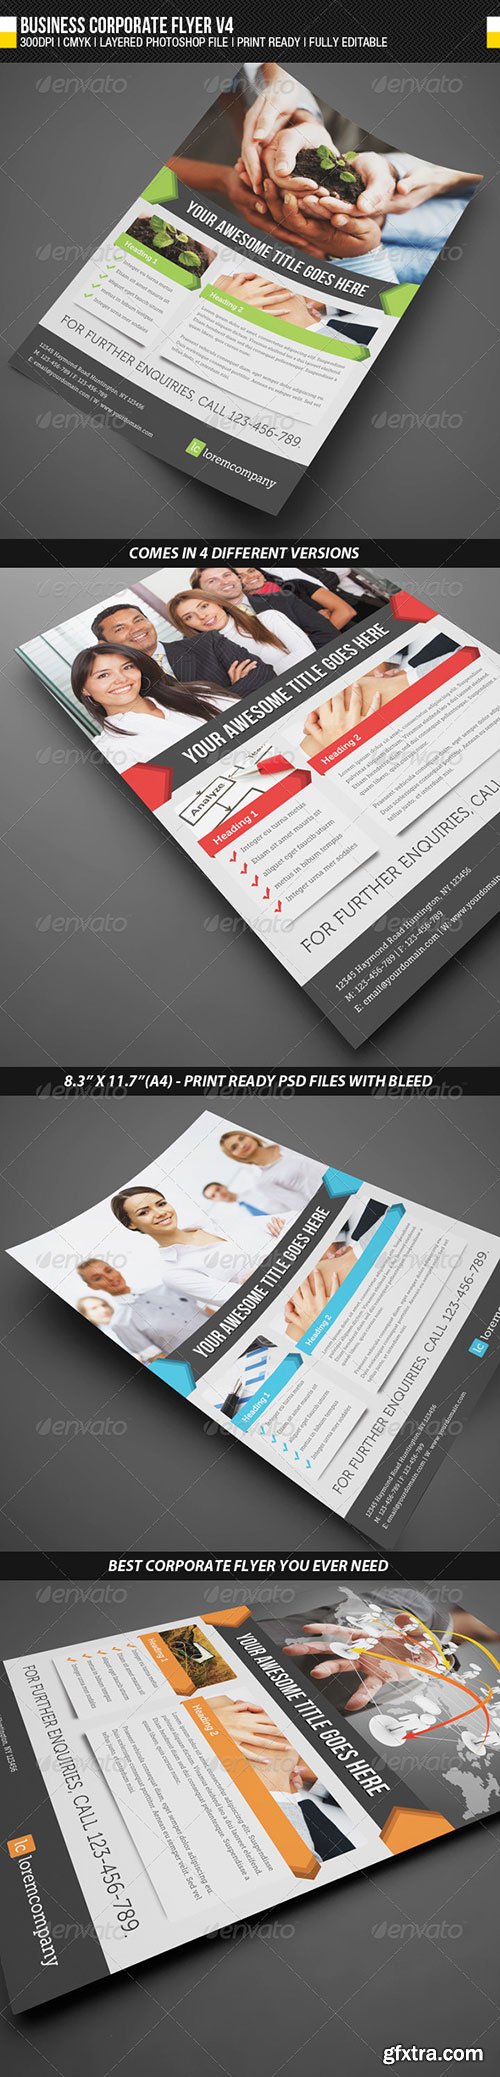 GraphicRiver - Business Corporate Flyer V4